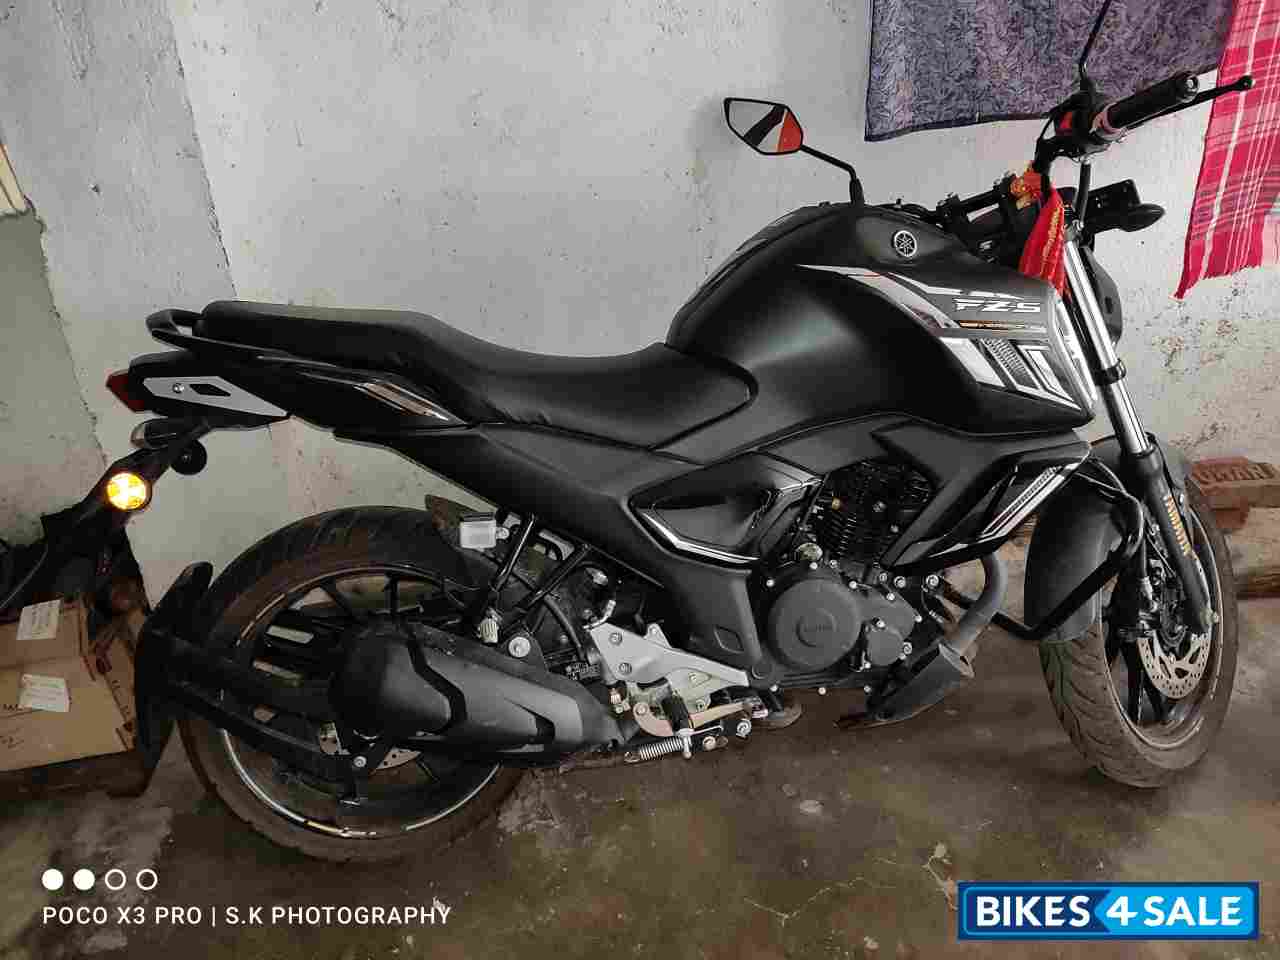 Used 2021 model Yamaha FZ FI V3 BS6 for sale in Ranchi. ID 348442. Mate Black colour - Bikes4Sale